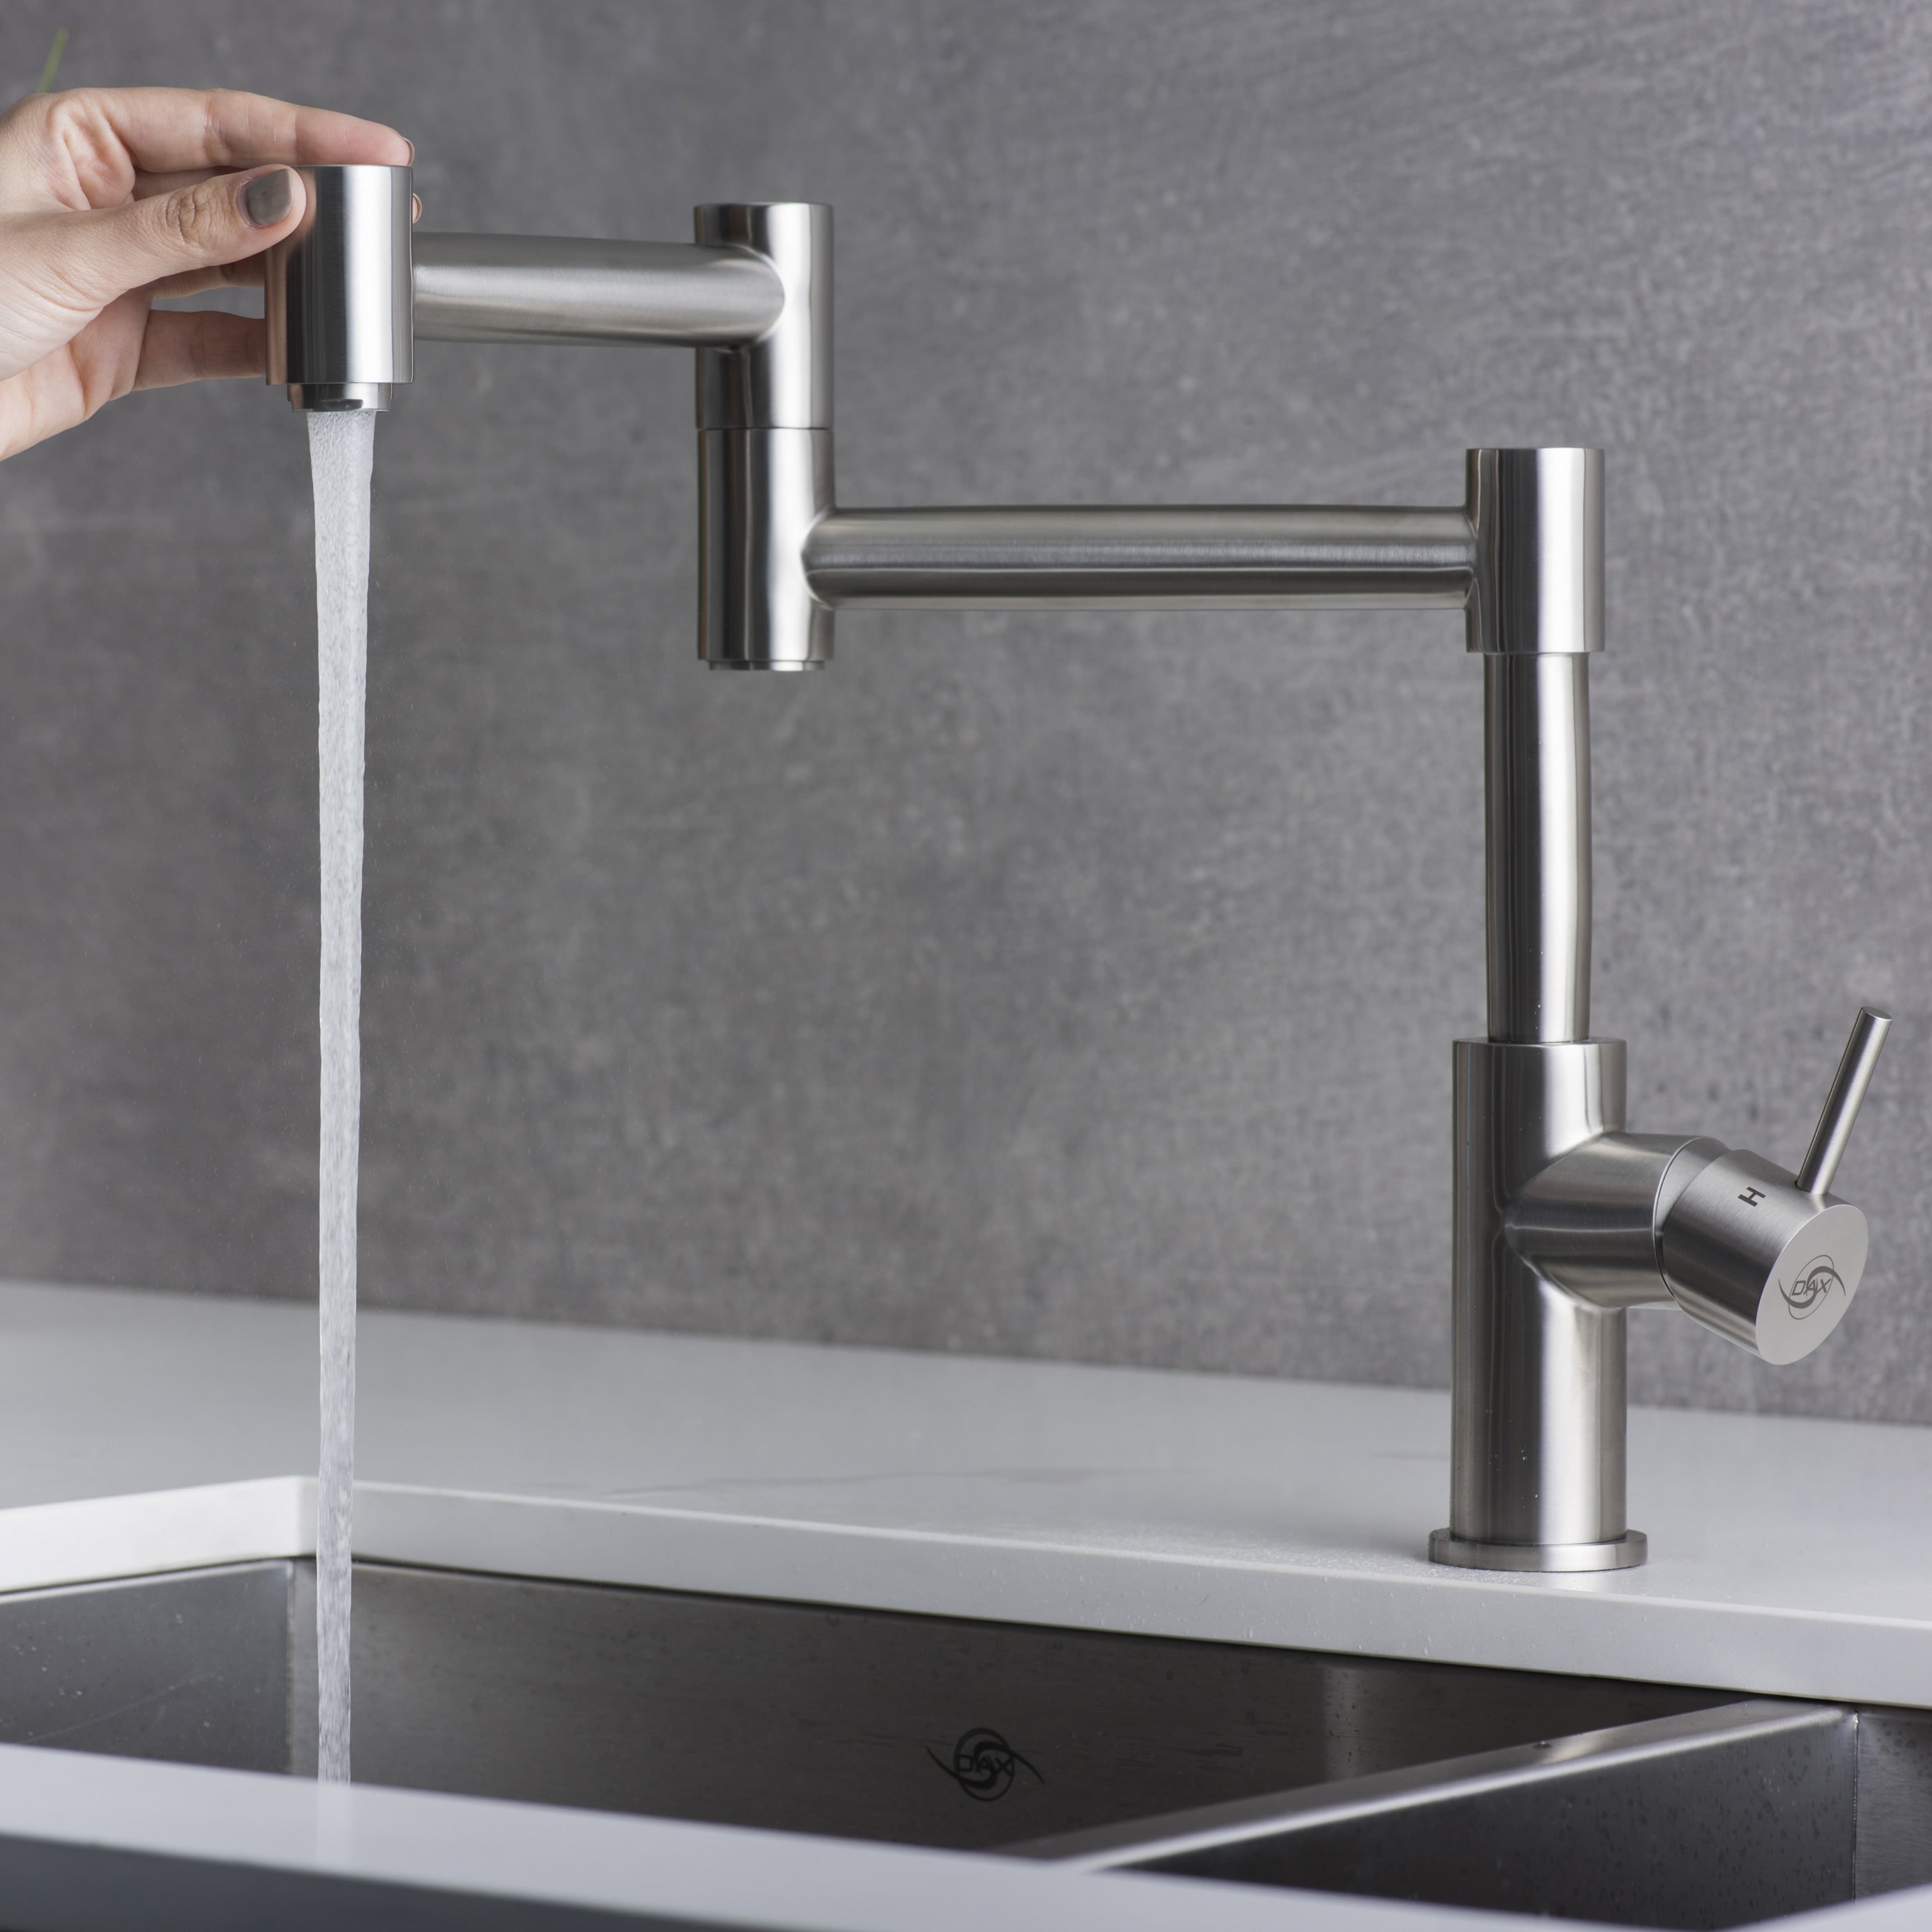 DAX Modern Sink Kitchen Faucet, Single Lever, Stainless Steel Body, Brushed Stainless Steel Finish, Size 7-1/2 x 12-3/4 Inches (DAX-006-01)